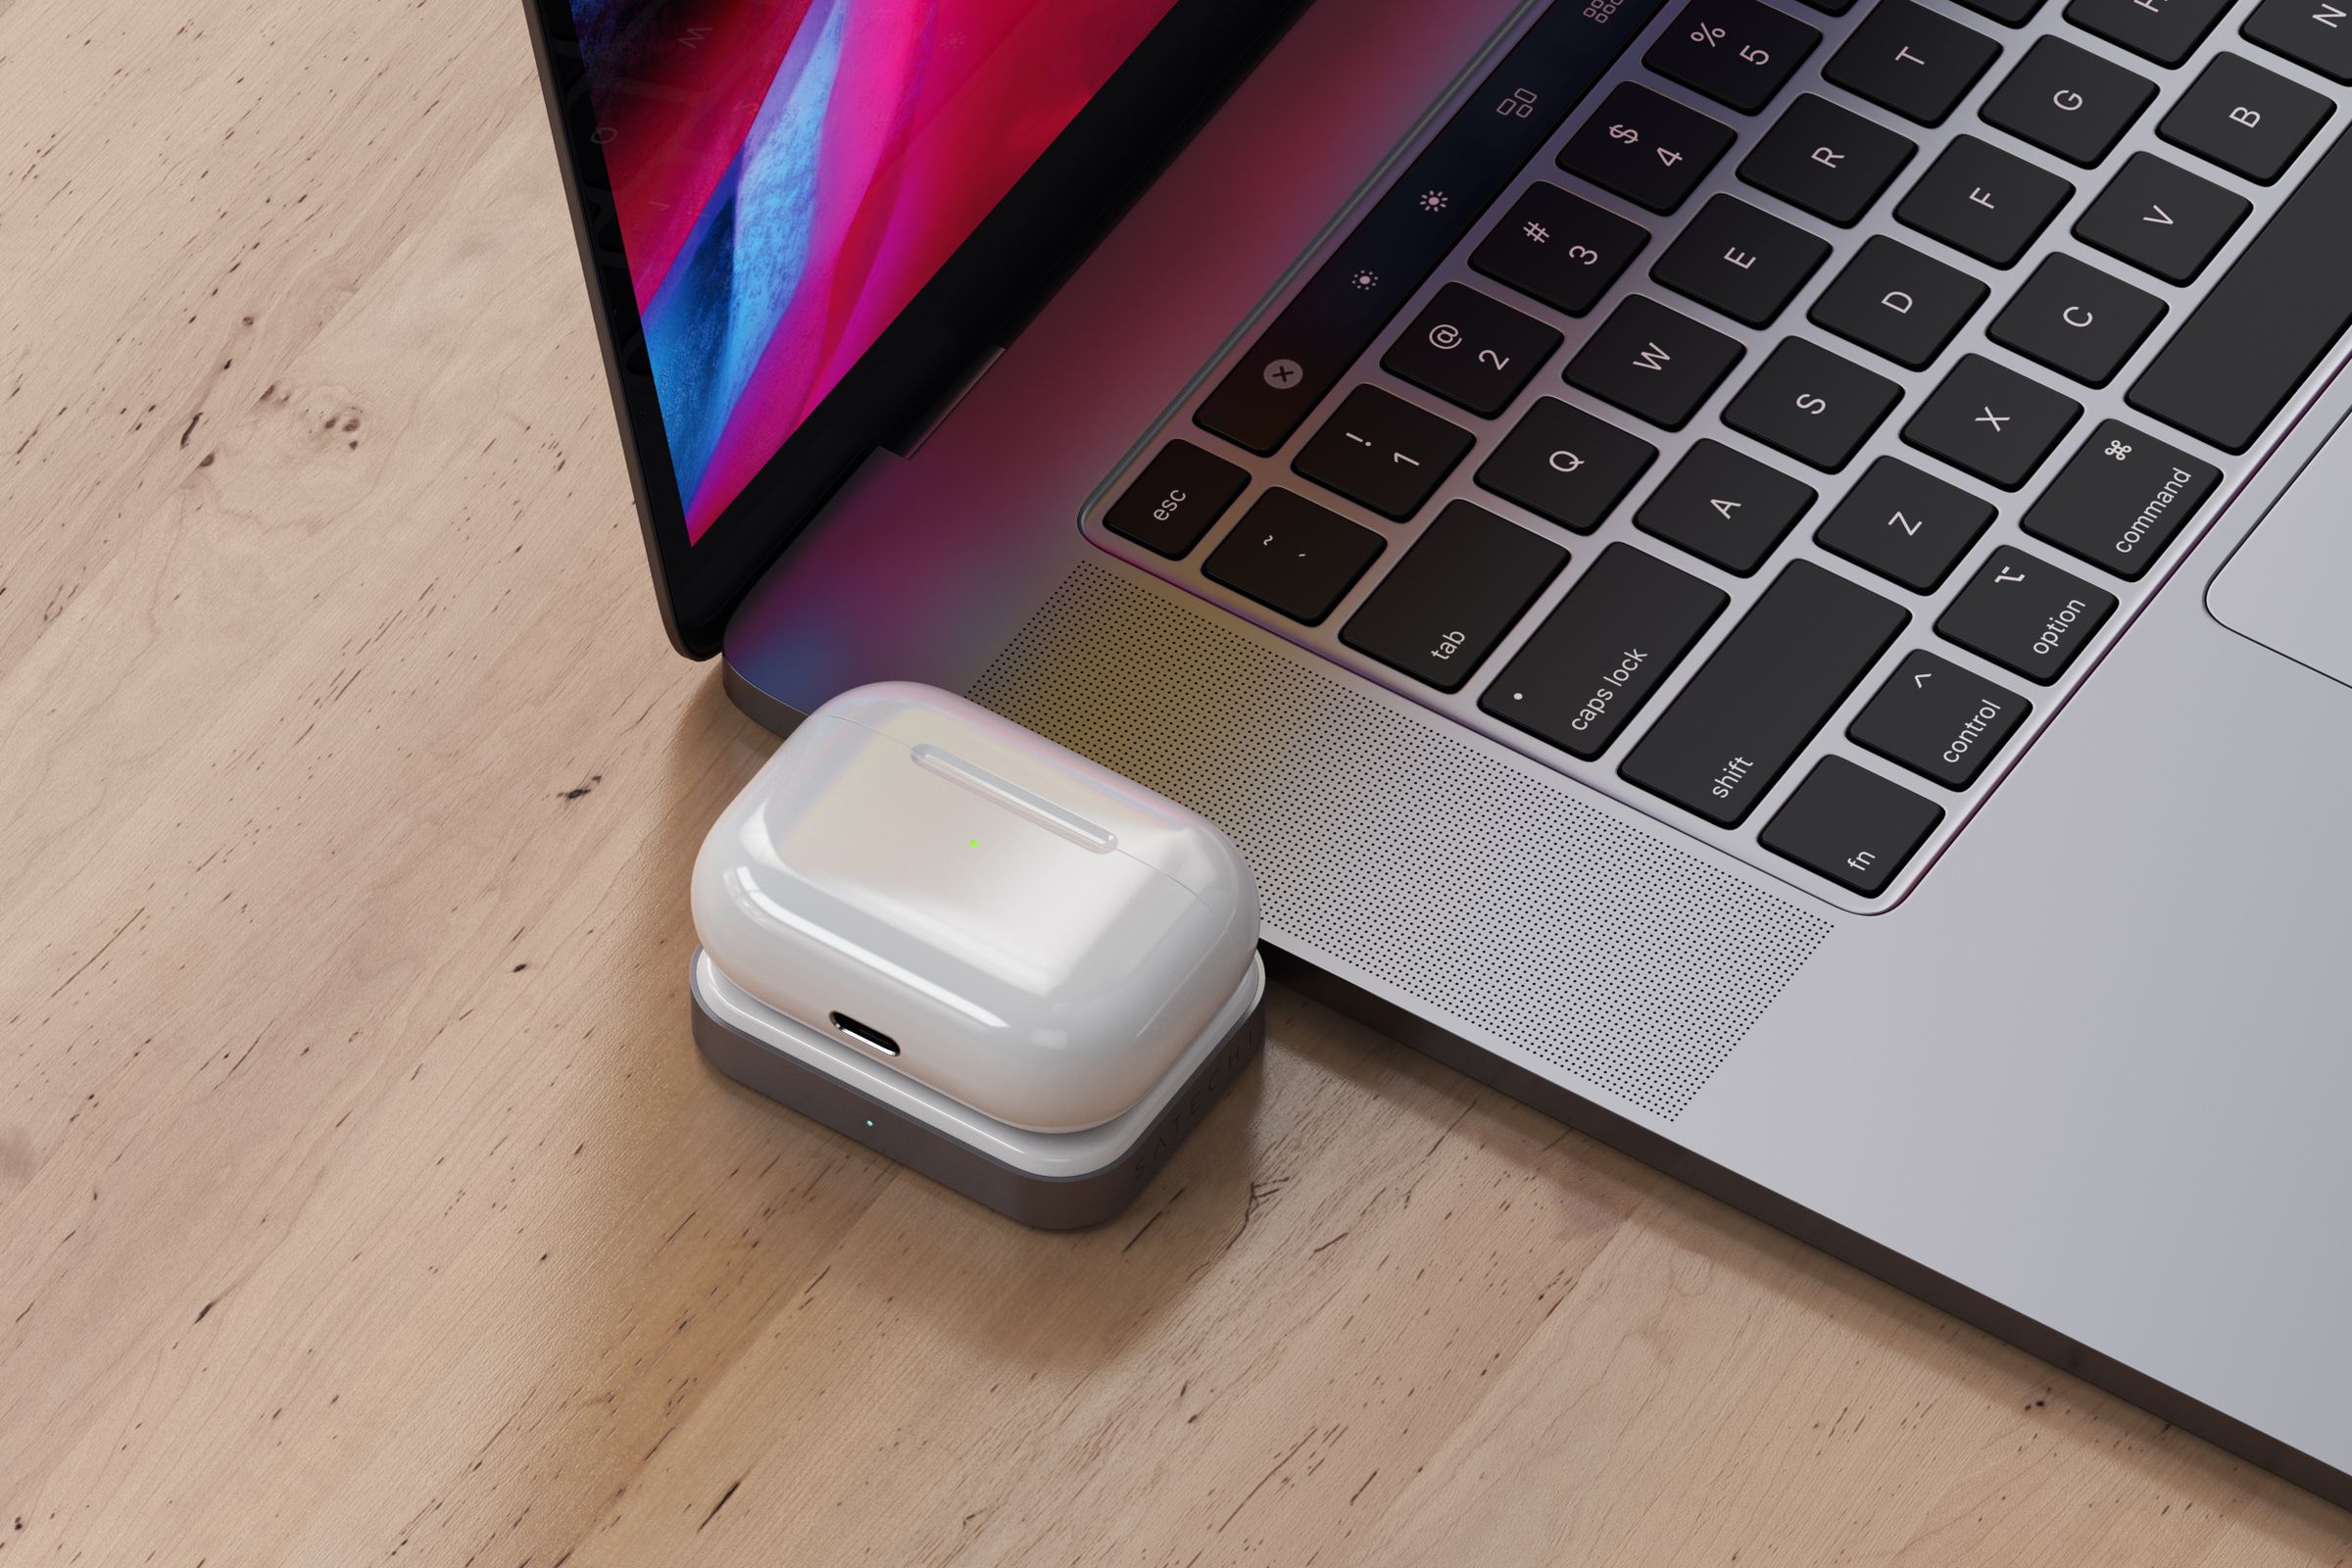 You plug the wireless charger into a spare USB-C port, and place your AirPods case on it for wireless charging.